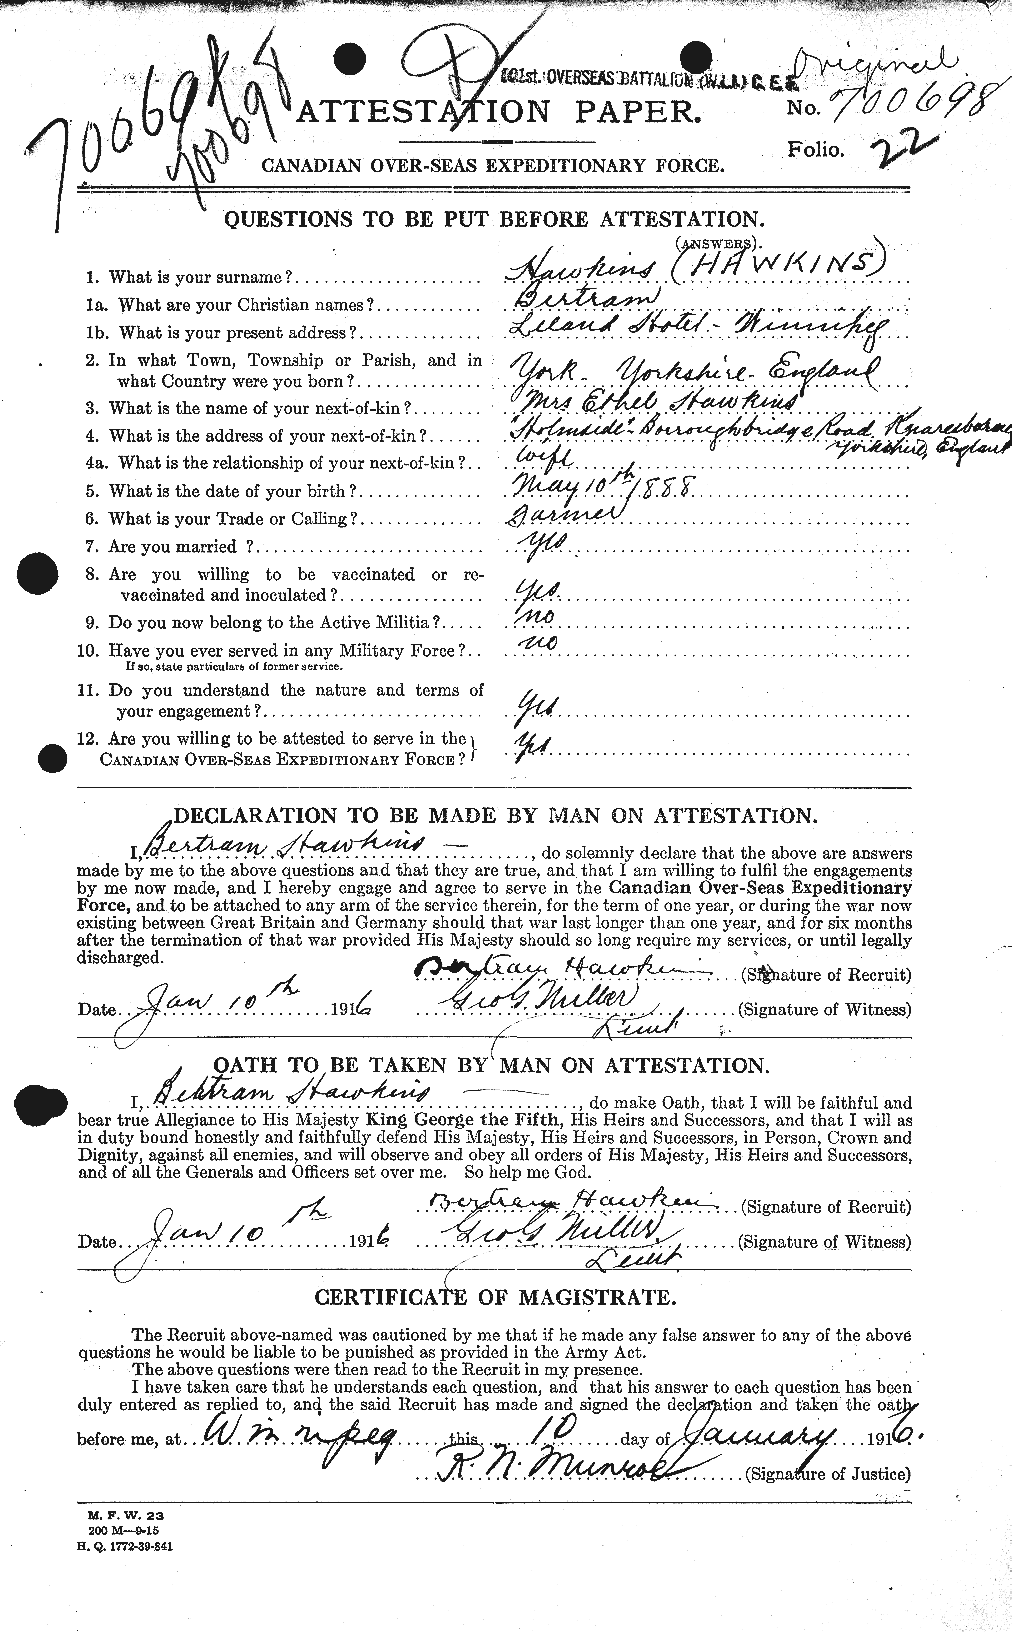 Personnel Records of the First World War - CEF 384638a